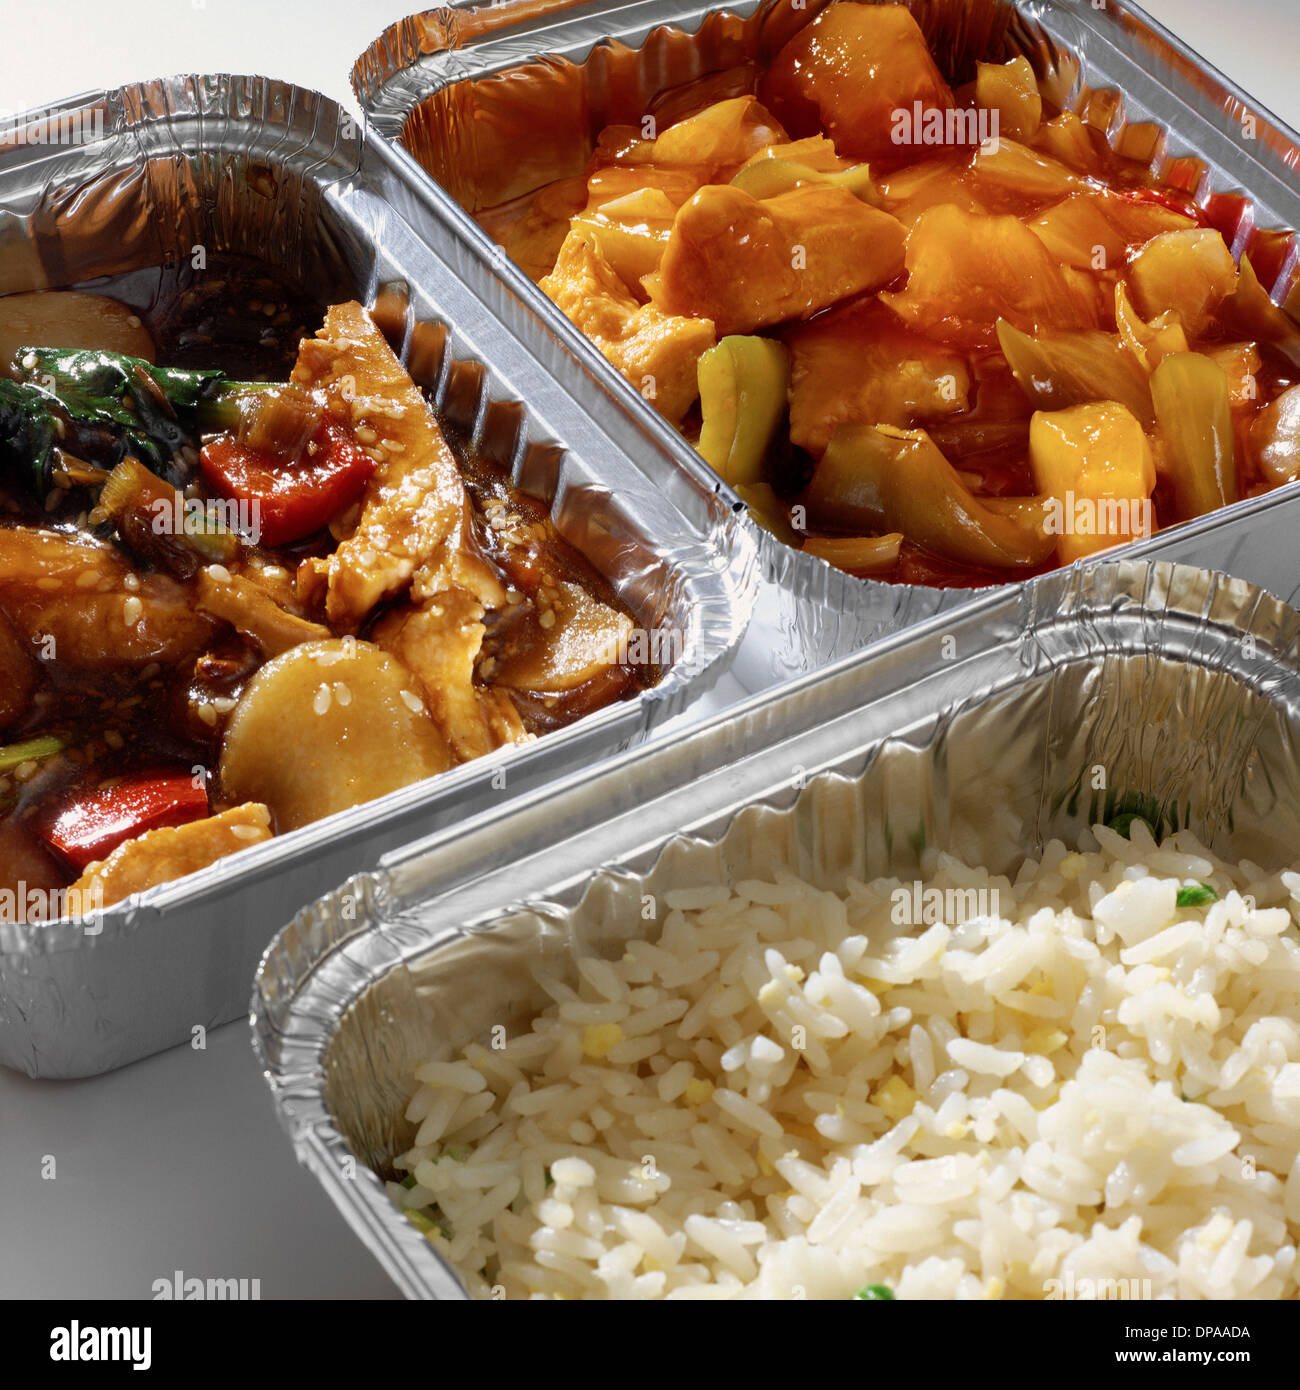 Take away curry and rice in cartons Stock Photo